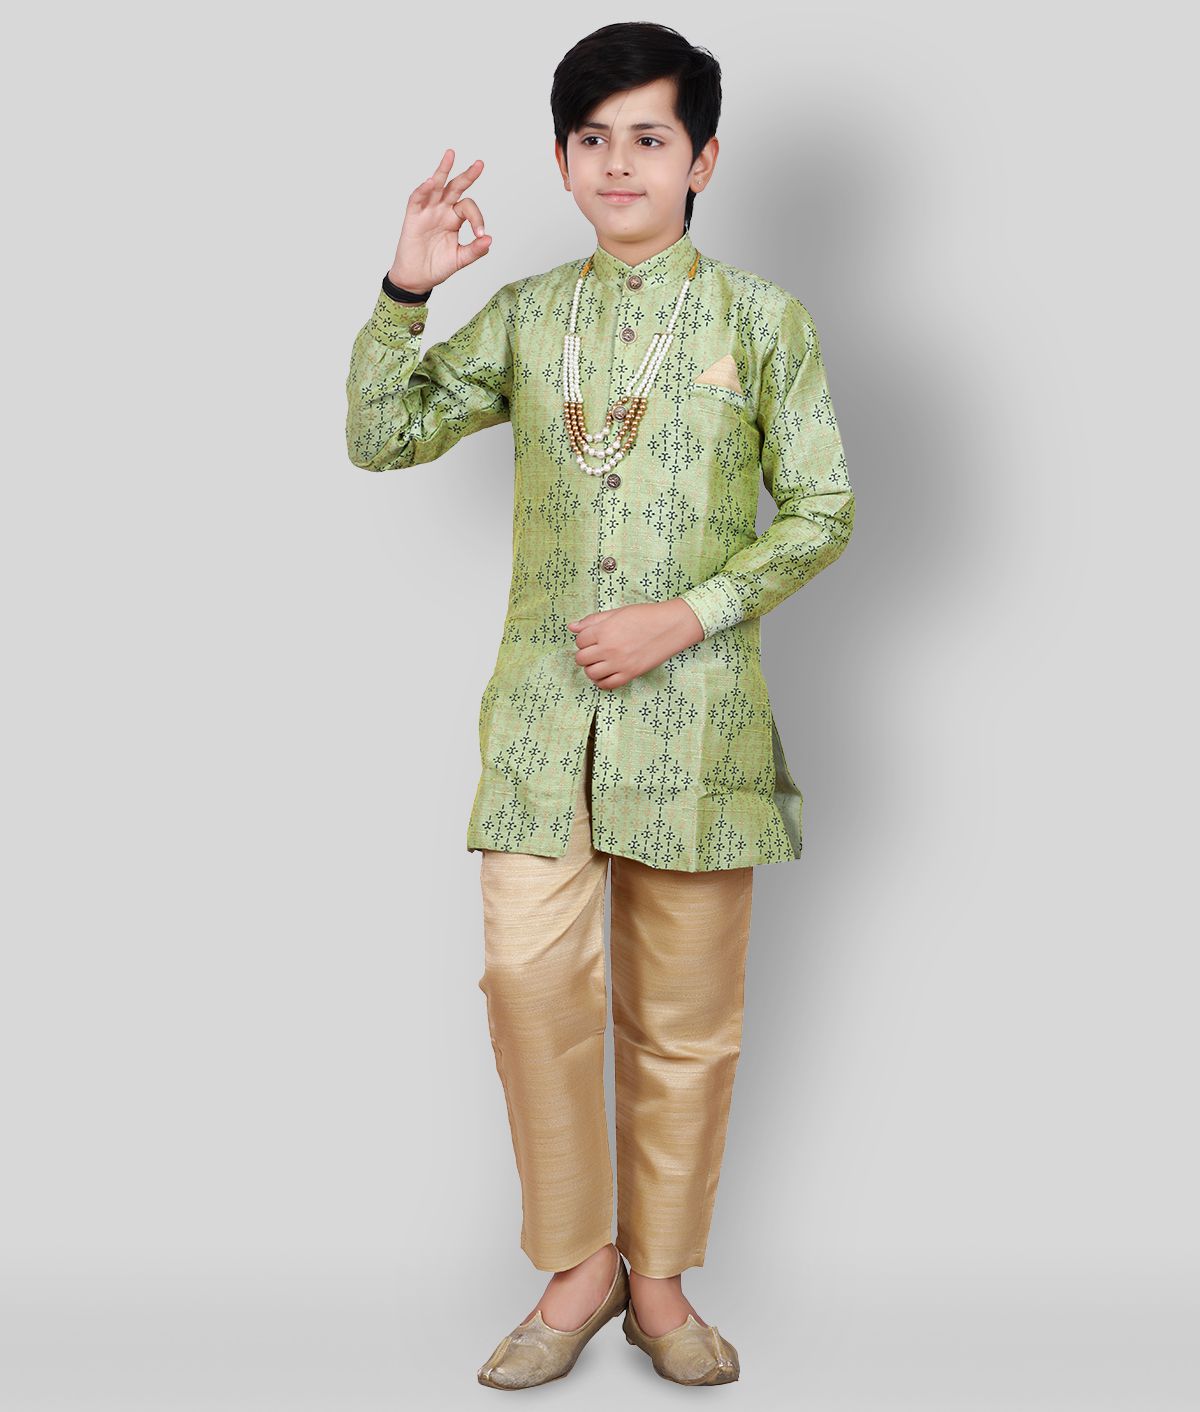     			Fourfolds Ethnic Wear Front Open Kurta With Trousers Style Pyjama for Kids and Boys